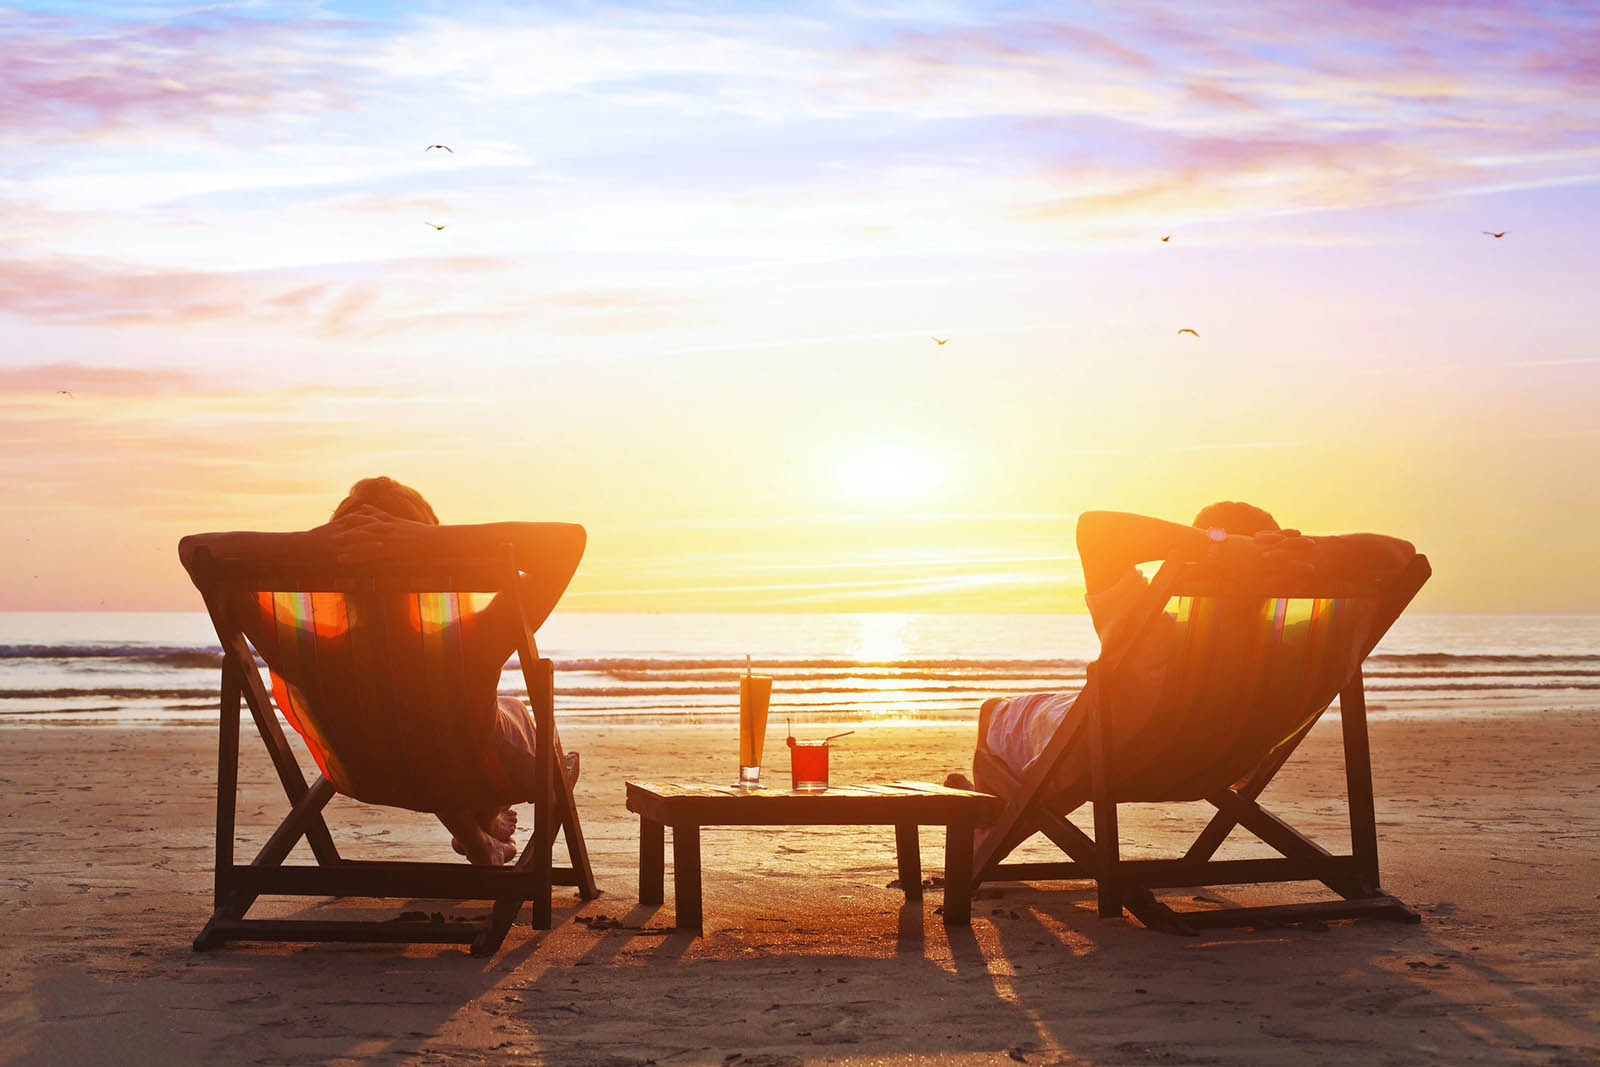 Which Part Of The US Are You From? Couple Relaxing On Beach At Sunset